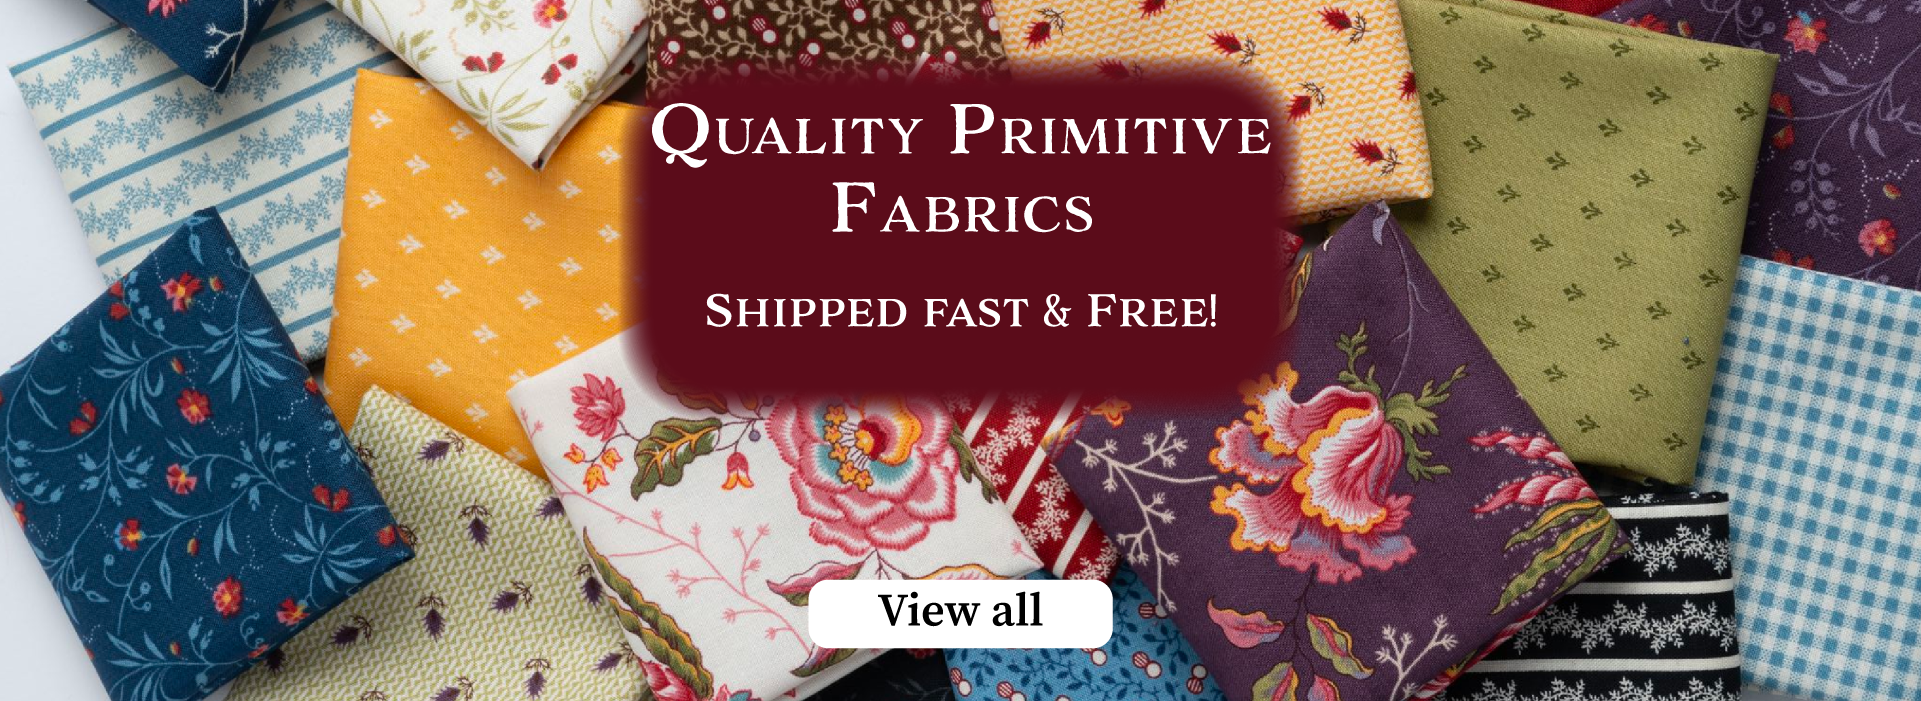 Quality primitive fabrics shipped fast and free. text on background of floral and primitive fabrics. view all button with clickable link. Image banner for farmhouse quilting co